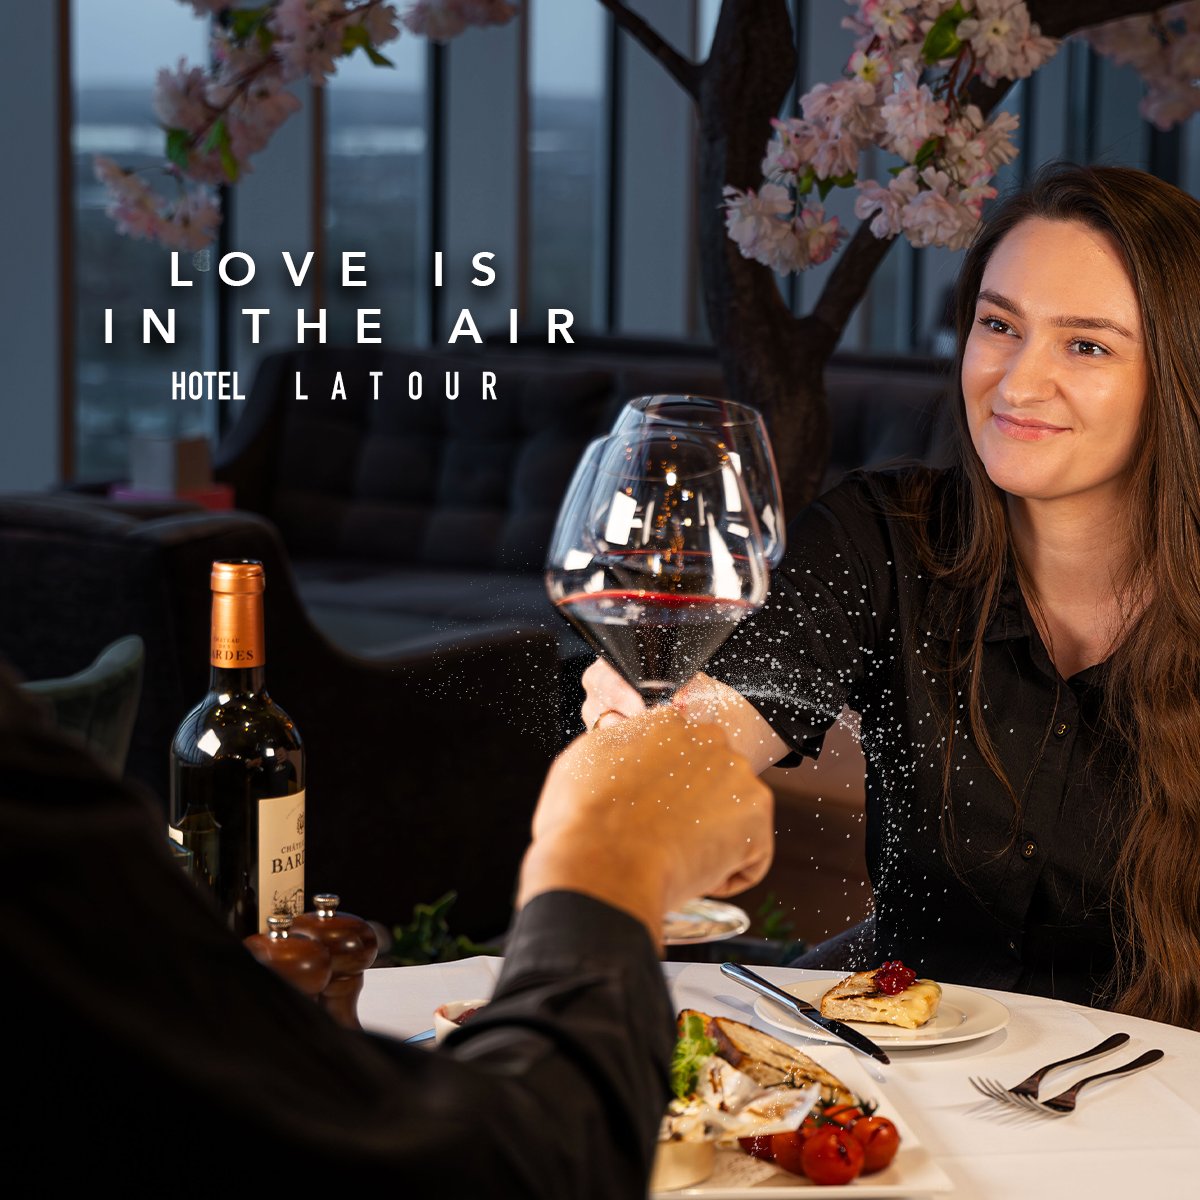 Love is in the air at Hotel La Tour! 💖 Wishing you a Happy Valentine's Day filled with the sweetest moments.💫